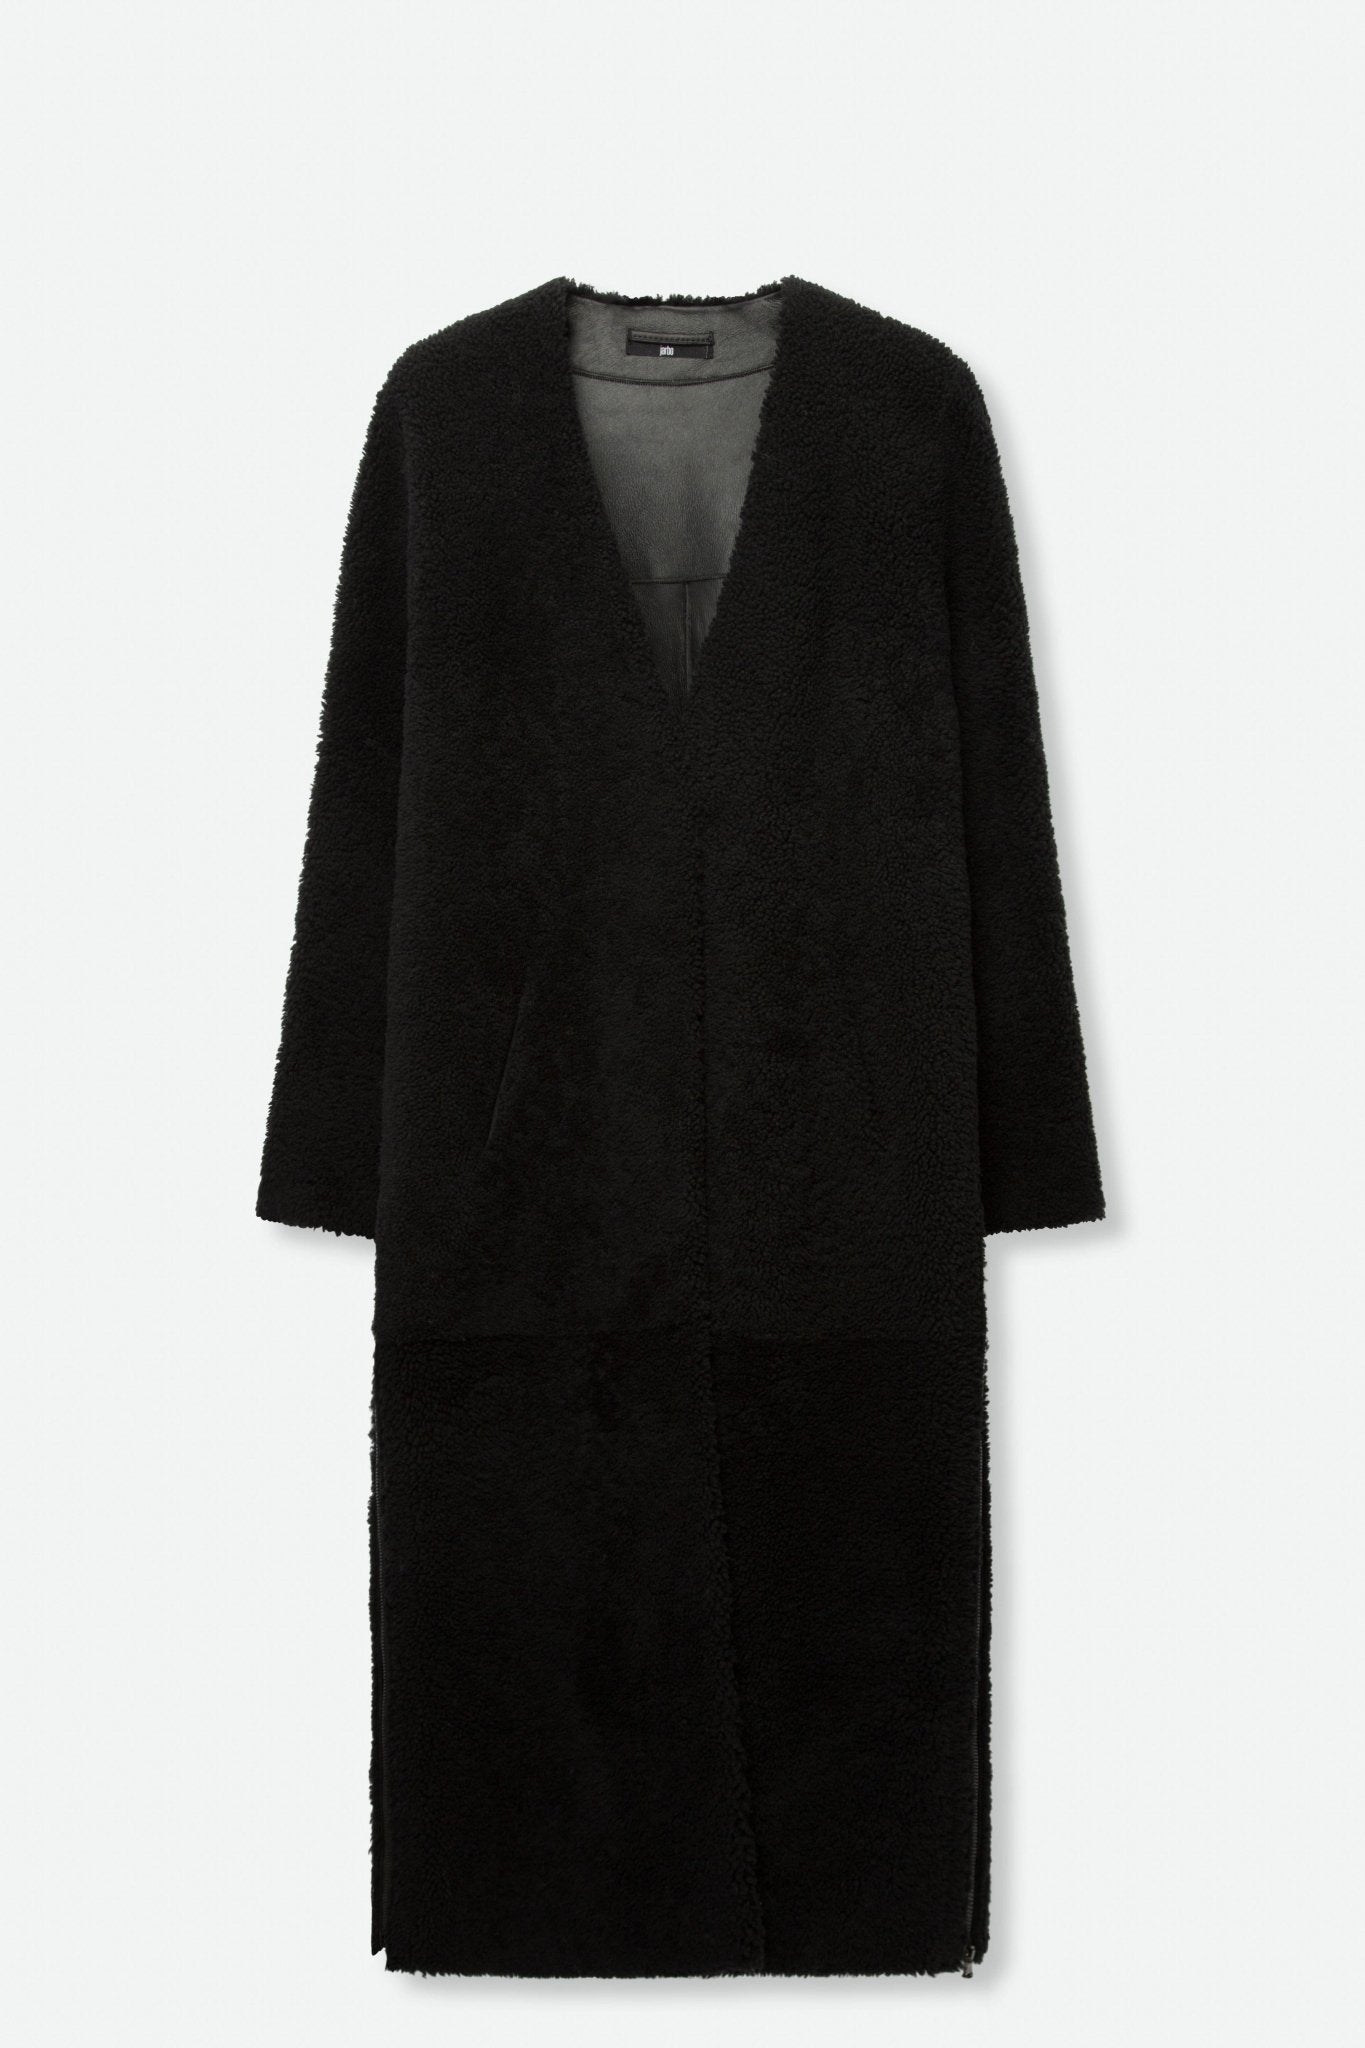 SHEARLING LONG COAT WITH SIDE VENT ZIP - Jarbo